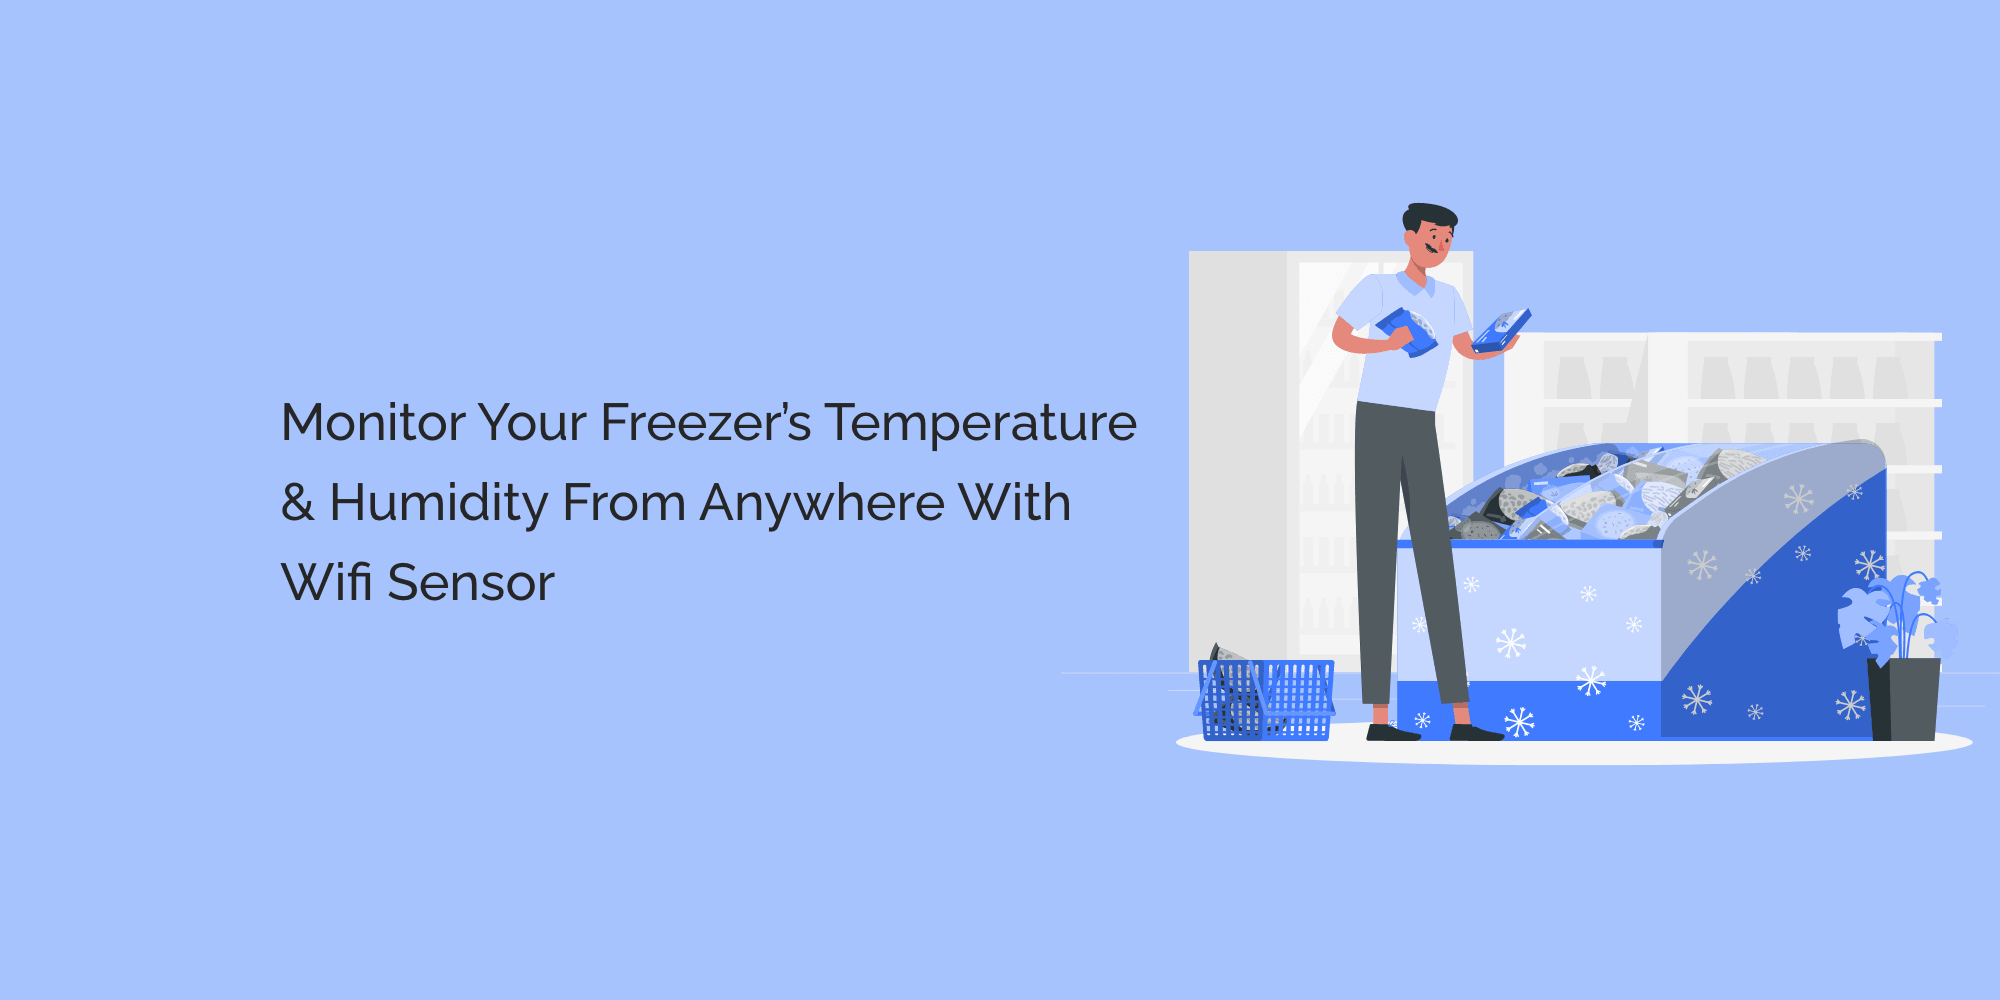 Monitor Your Freezer's Temperature & Humidity from Anywhere with Wifi Sensor